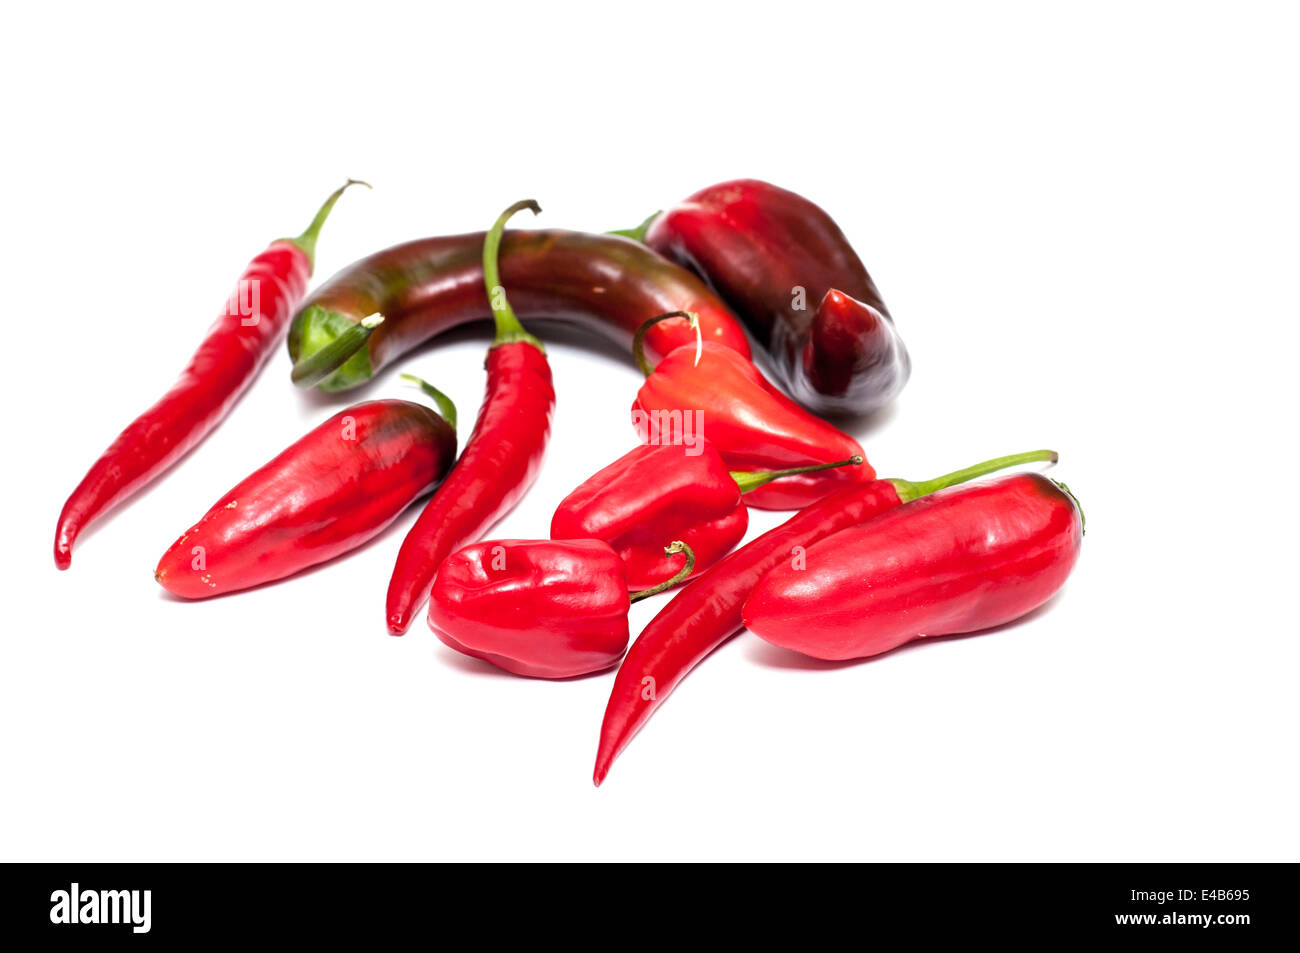 Several paprika and chili peppers Stock Photo